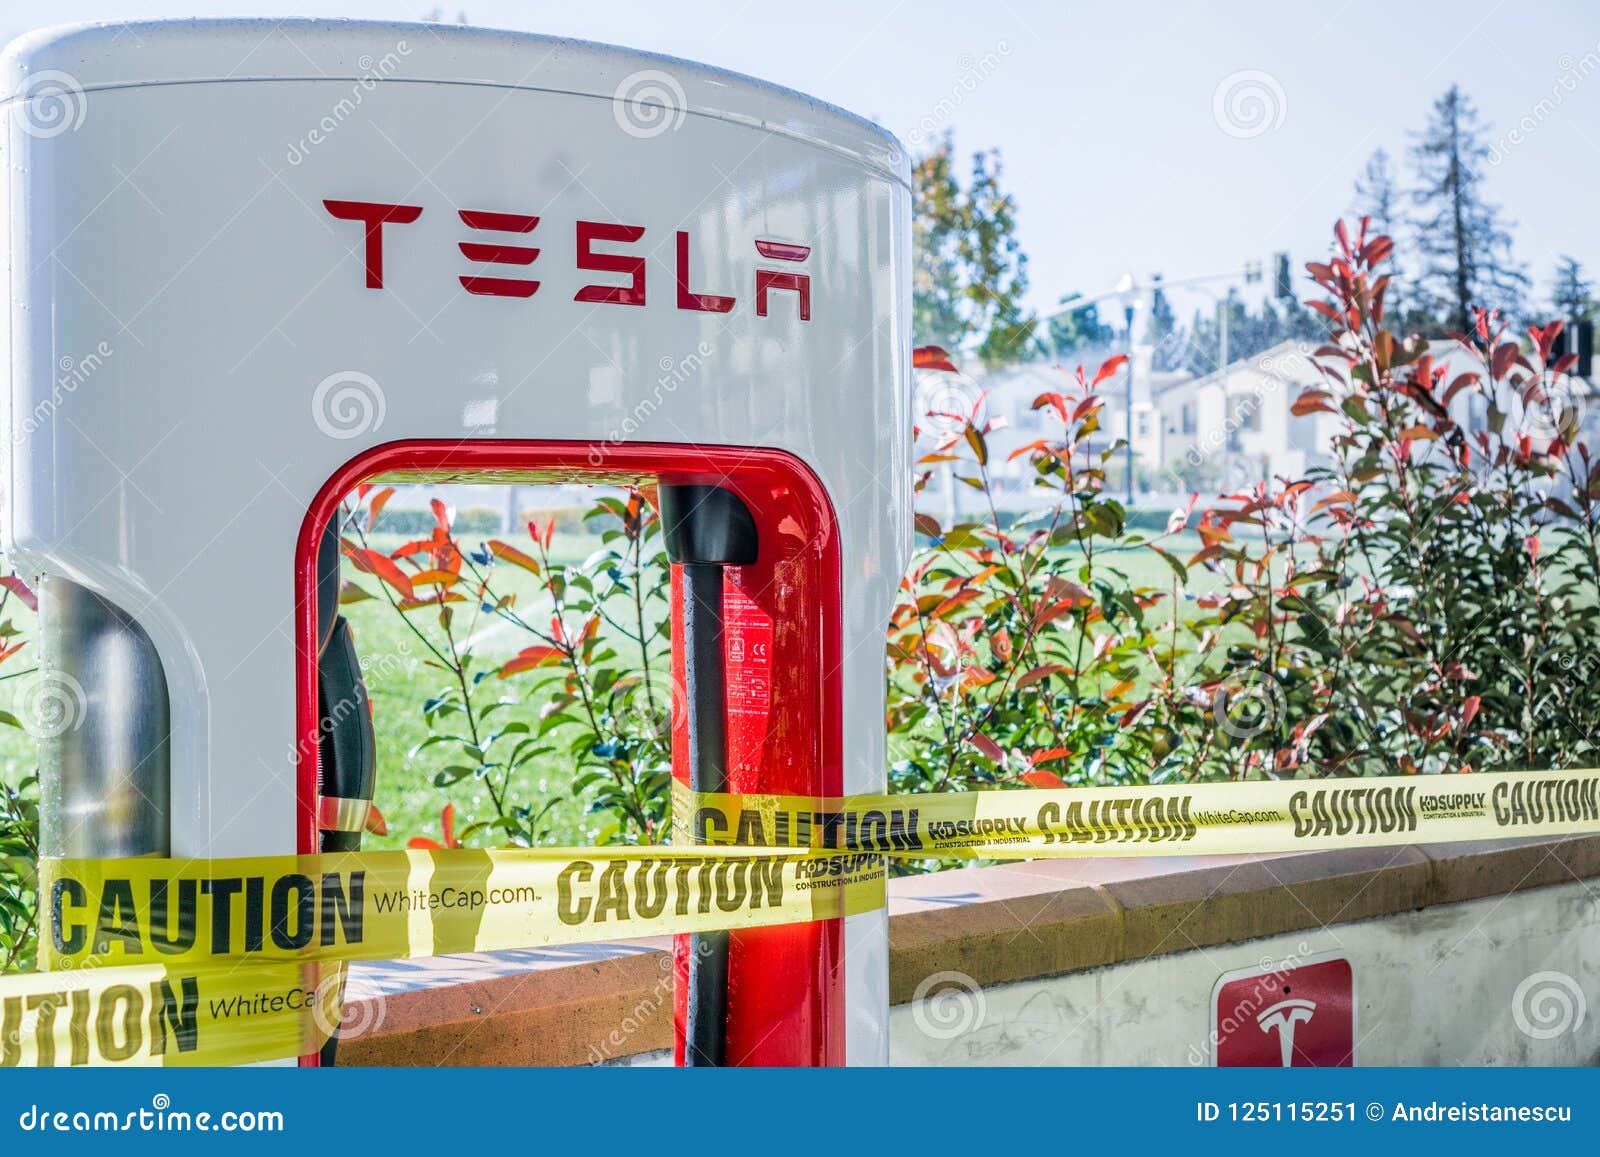 The new Tesla charging station being opened in downtown Sunnyvale, California